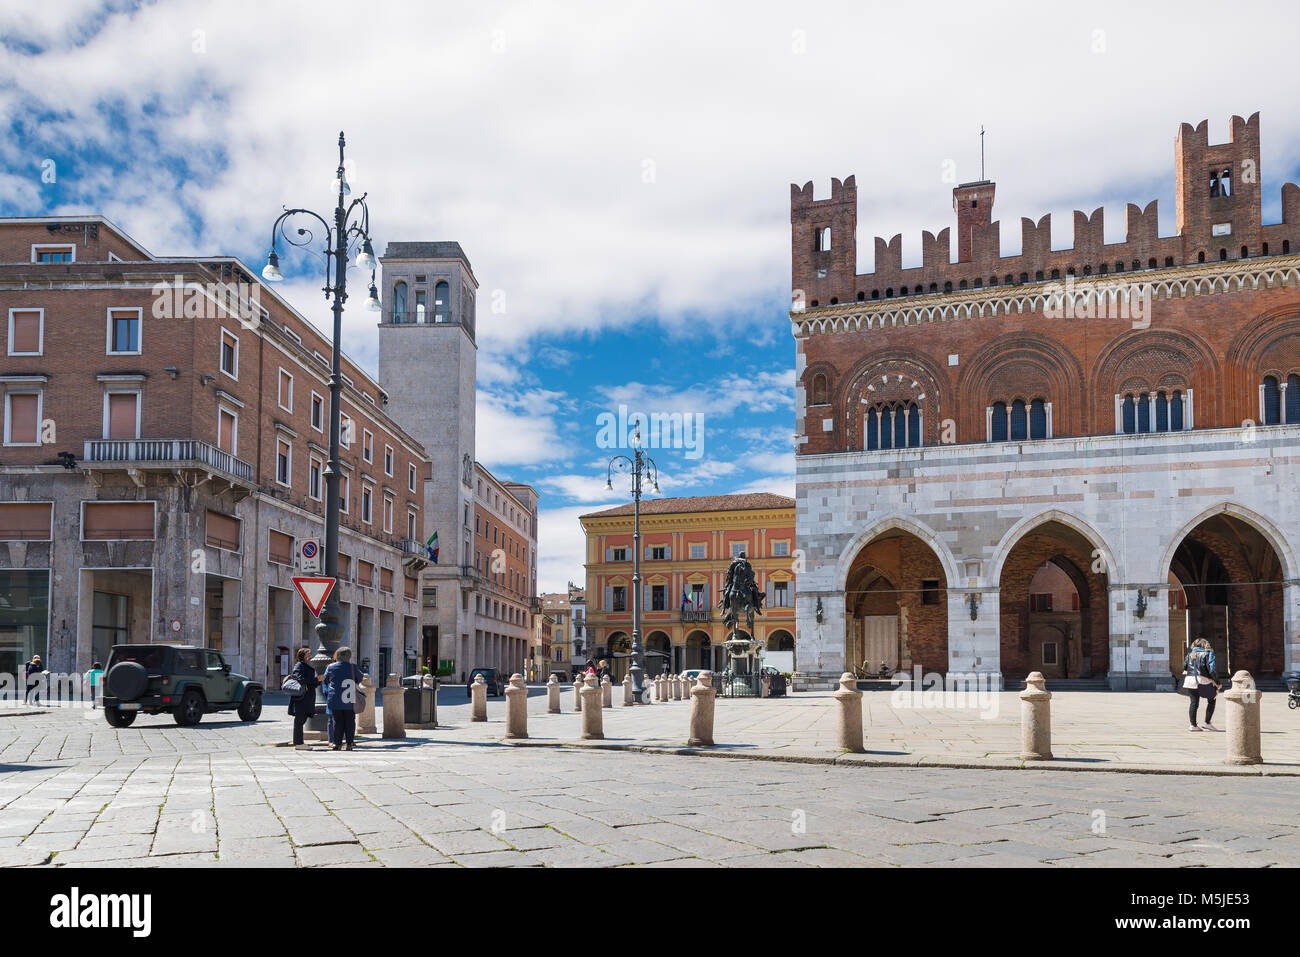 Piacenza, medieval town, Italy. City center with piazza Cavalli (square horses), palazzo Gotico (gothic palace - XIII century) Stock Photo